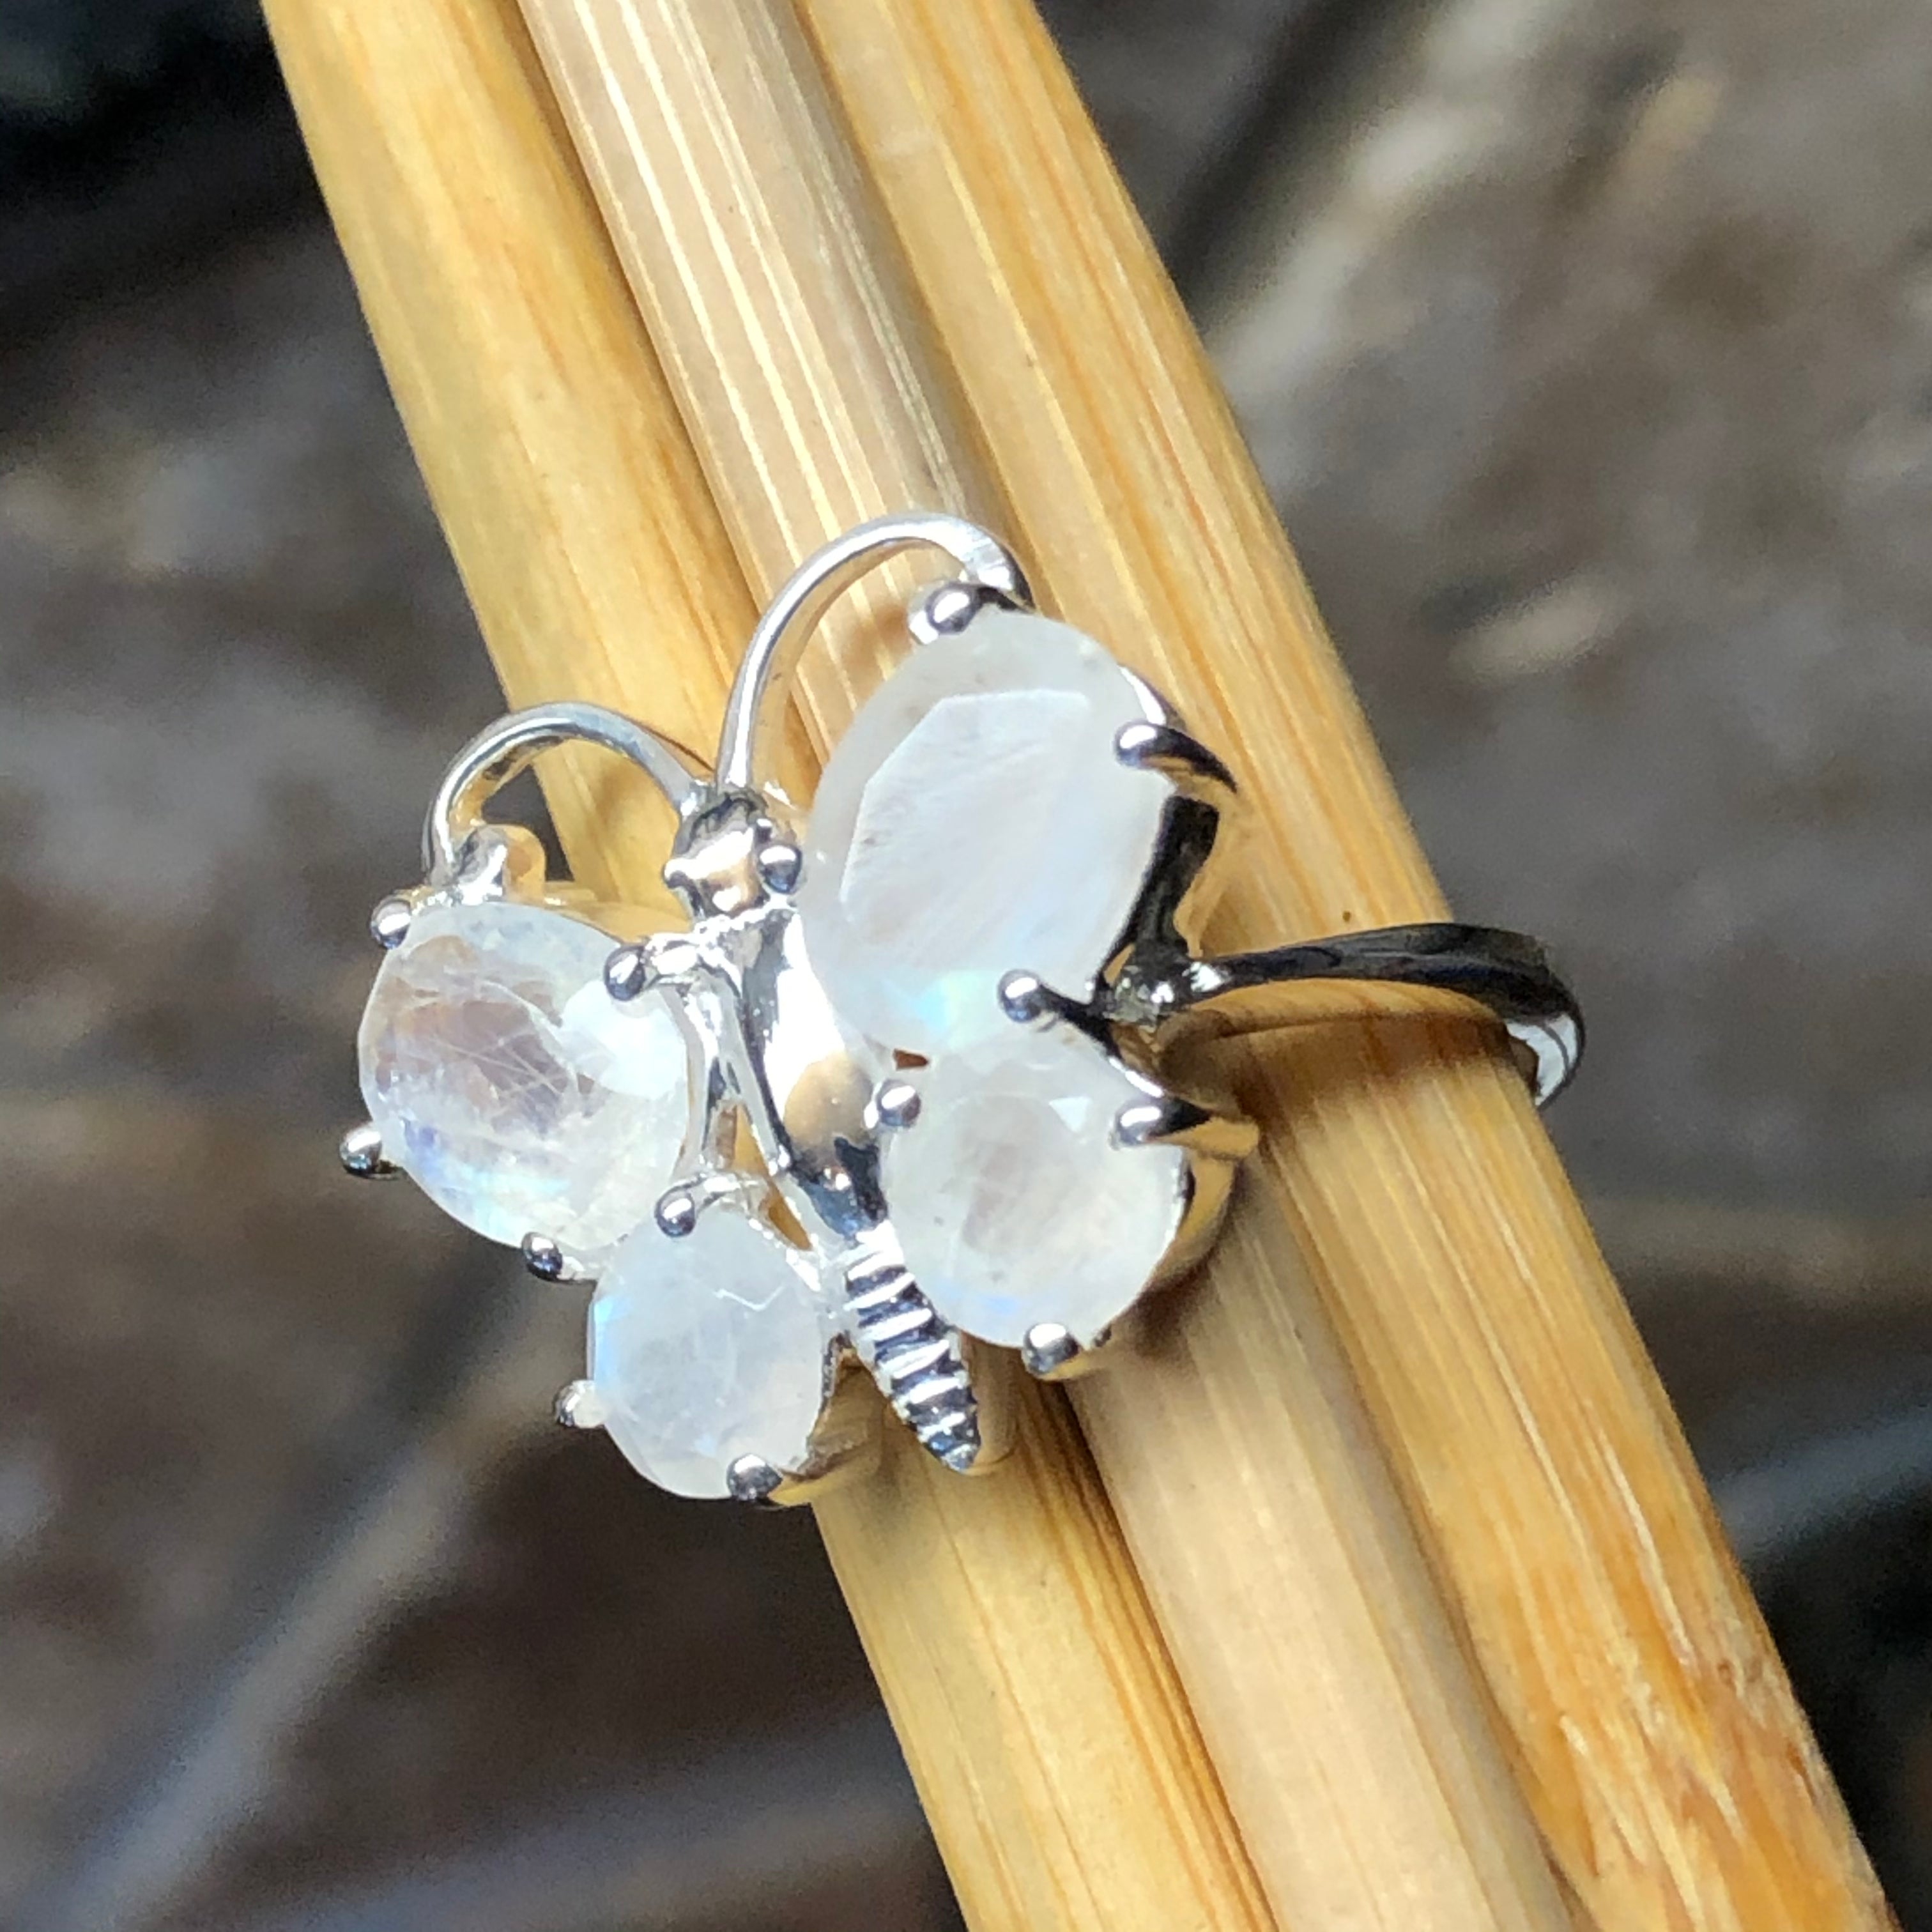 Genuine Rainbow Moonstone 925 Sterling Silver Ring Size 6, 7, 8, 9 - Natural Rocks by Kala